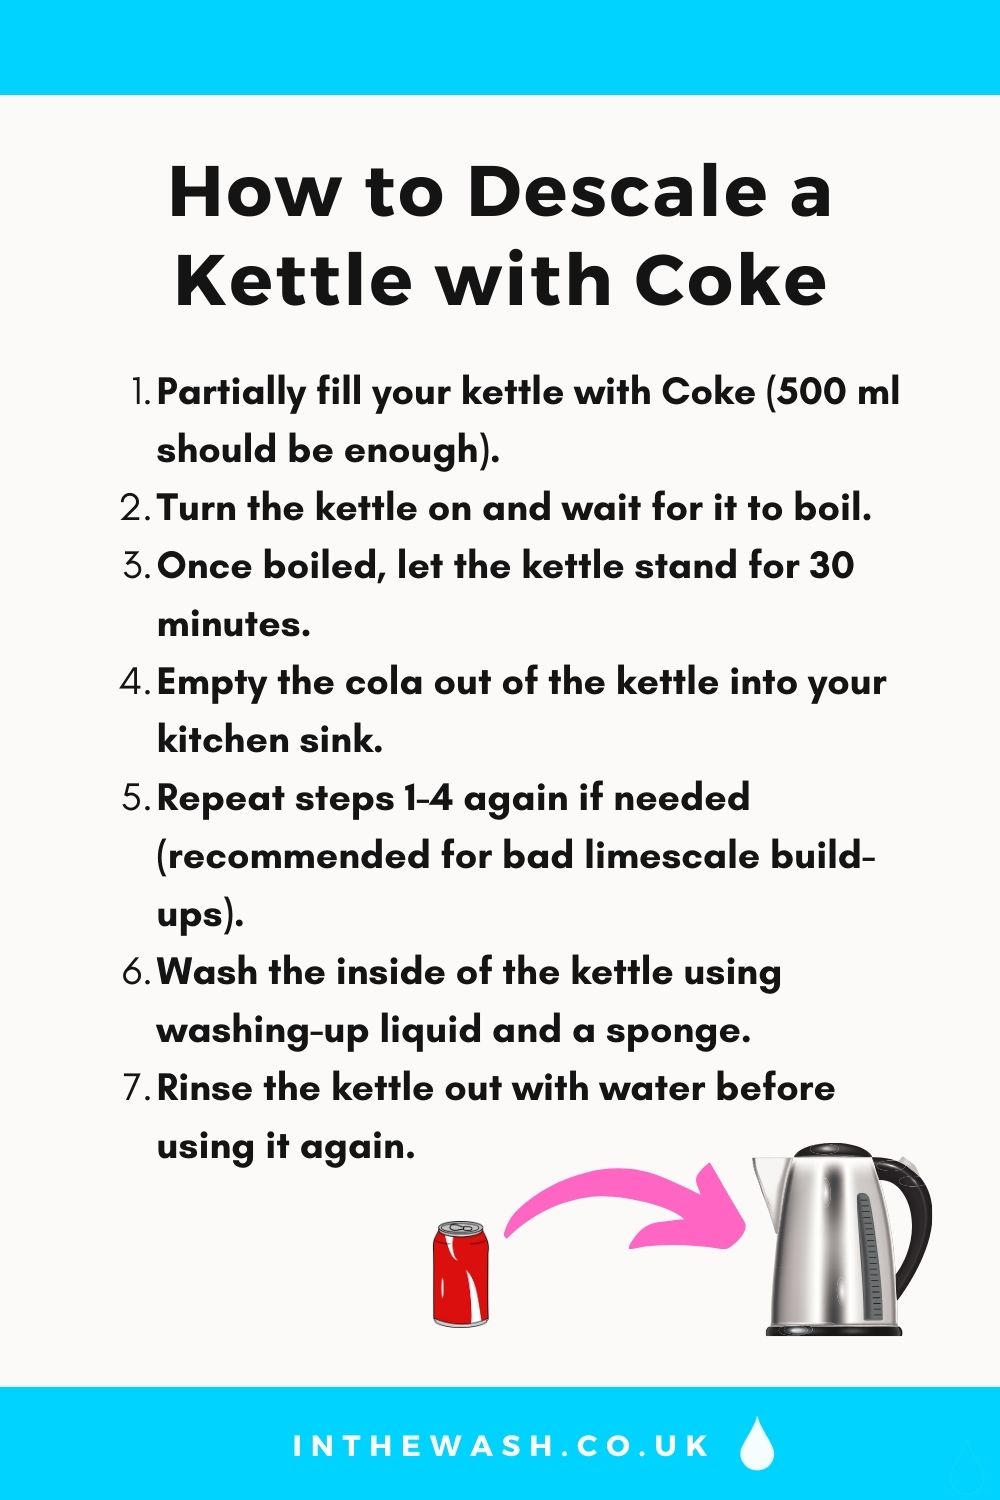 How to Descale a Kettle With Coke